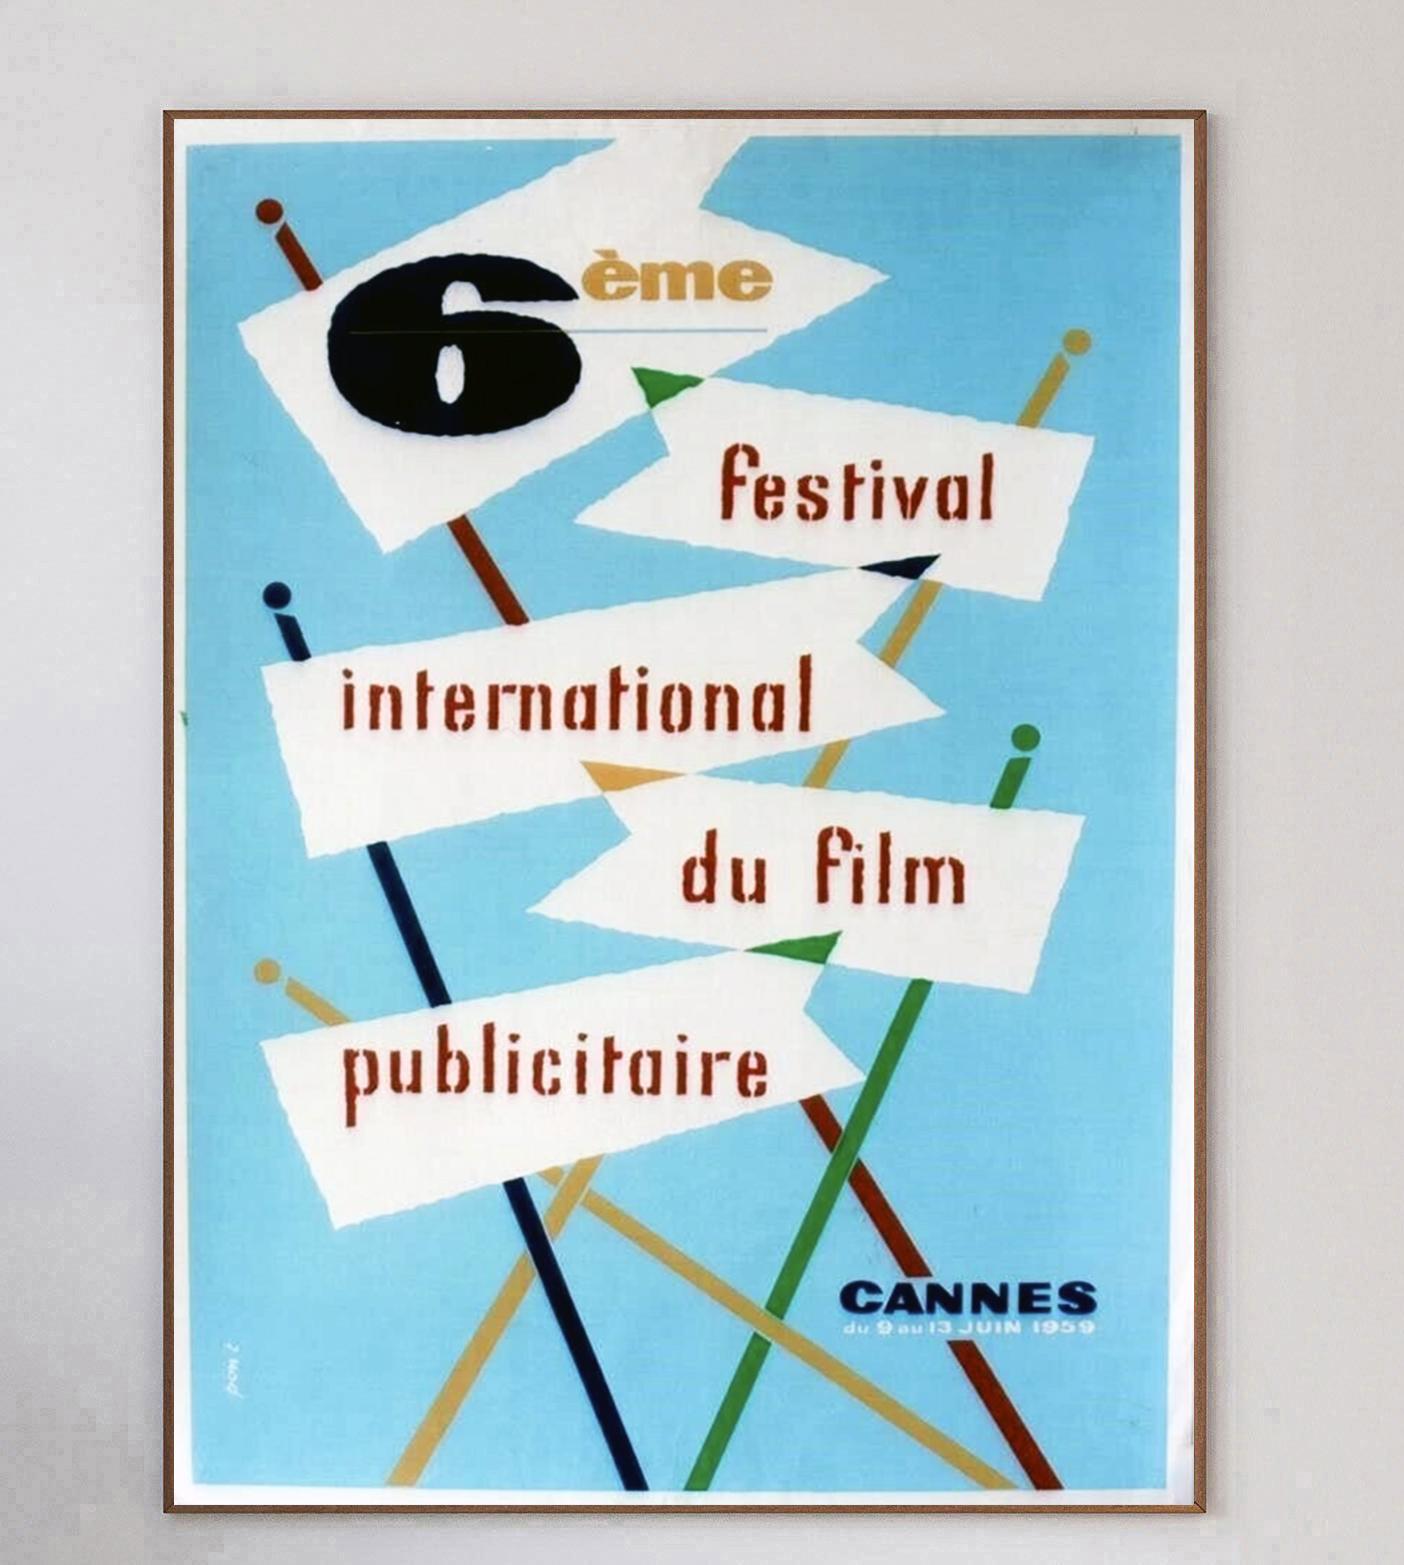 This poster for the 6th Cannes International Film Festival in 1959, held from June 9th to 13th in Cannes, France. The beautiful design is vibrant in colour with wonderful mid century modern design by Pont. At the festival, the Palm d'Or went to the